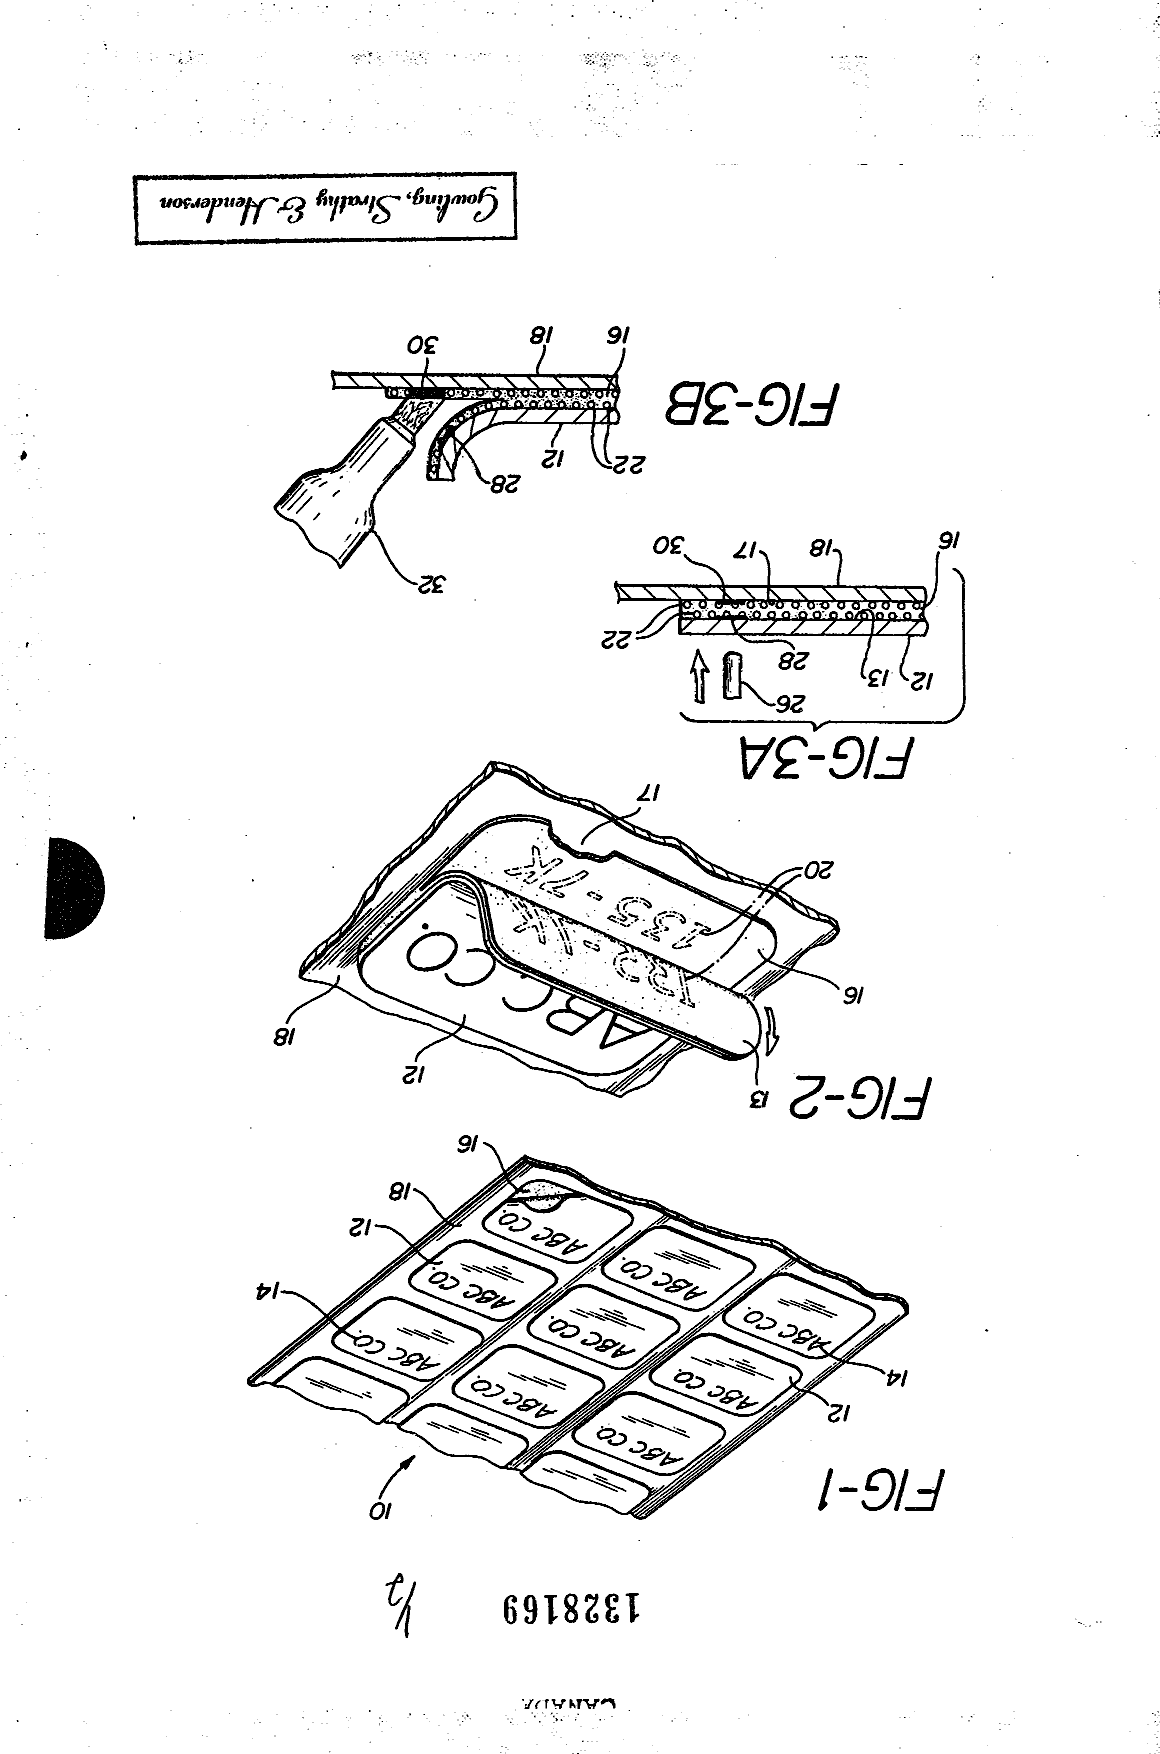 Canadian Patent Document 1328169. Drawings 19931222. Image 1 of 2